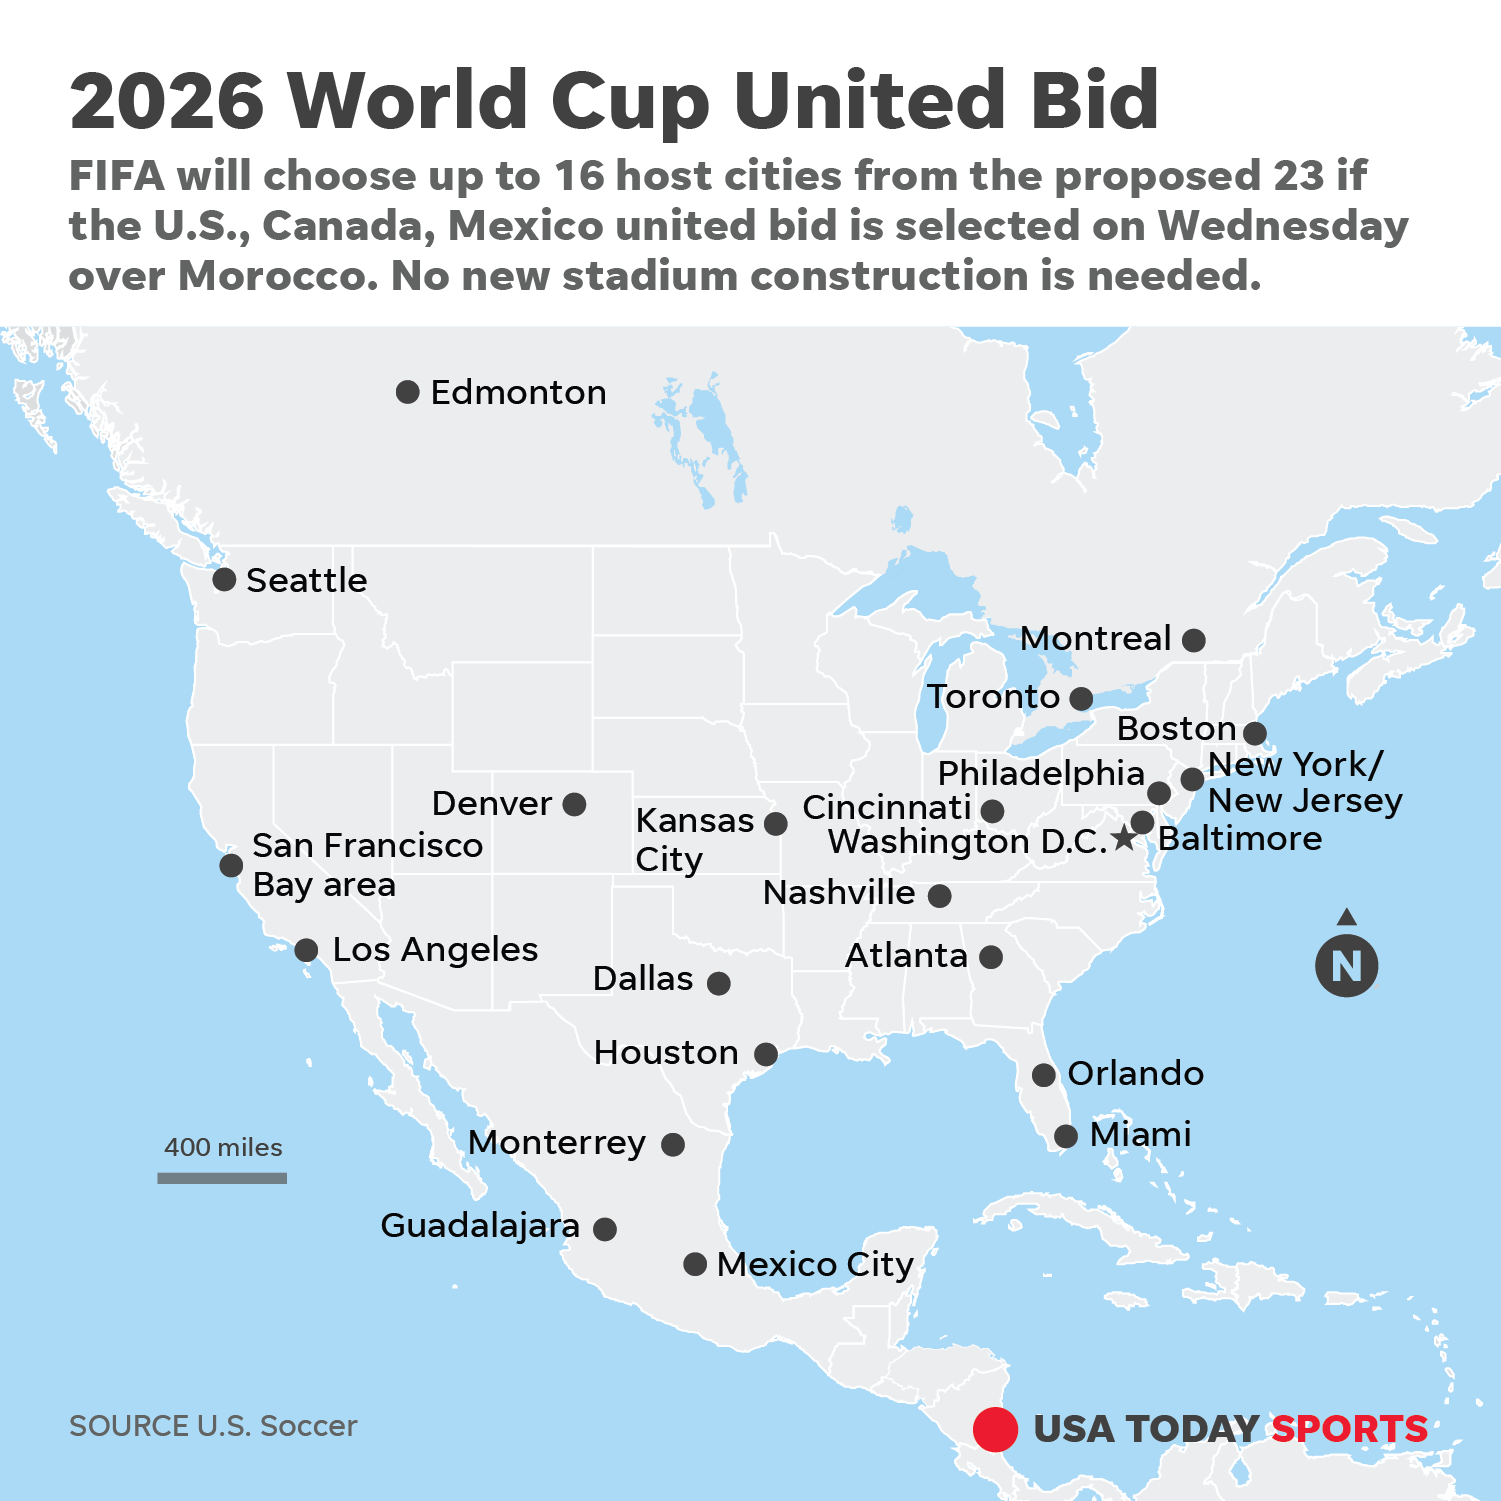 2026 World Cup vote: Does United Bid or Morocco hold the advantage?